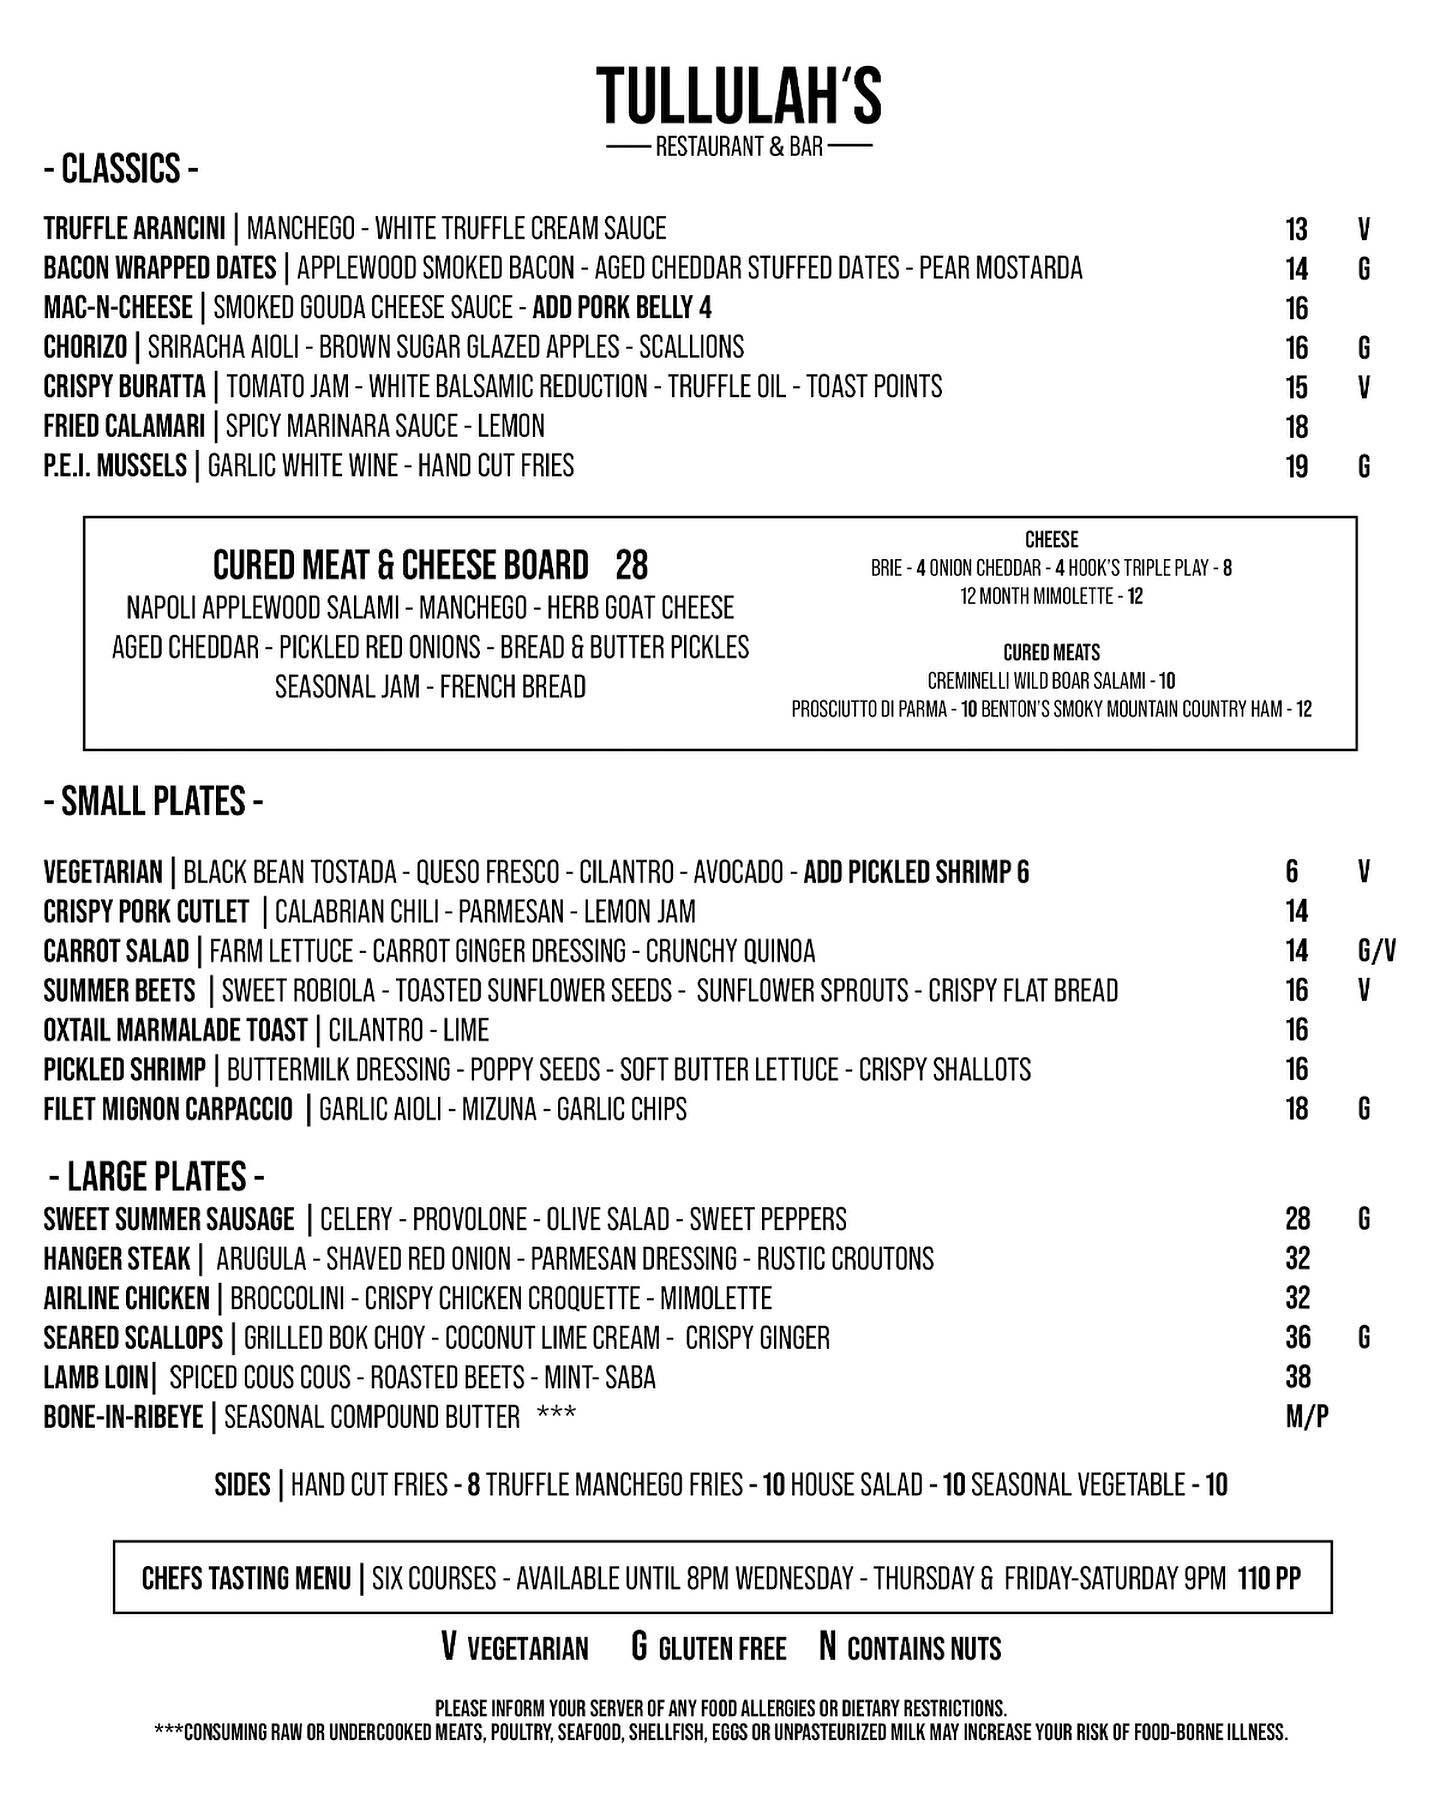 Our Summer Menu is here! Join us for dinner starting at 5 PM. Let us know what your excited to try!
.
.
.
#tullulahs #tullulahsbayshore #bayshore #longisland #newyork #southshoreeats #farmtotable #bayshoresfinest #supportlocal #eatlocal #fernetabouti